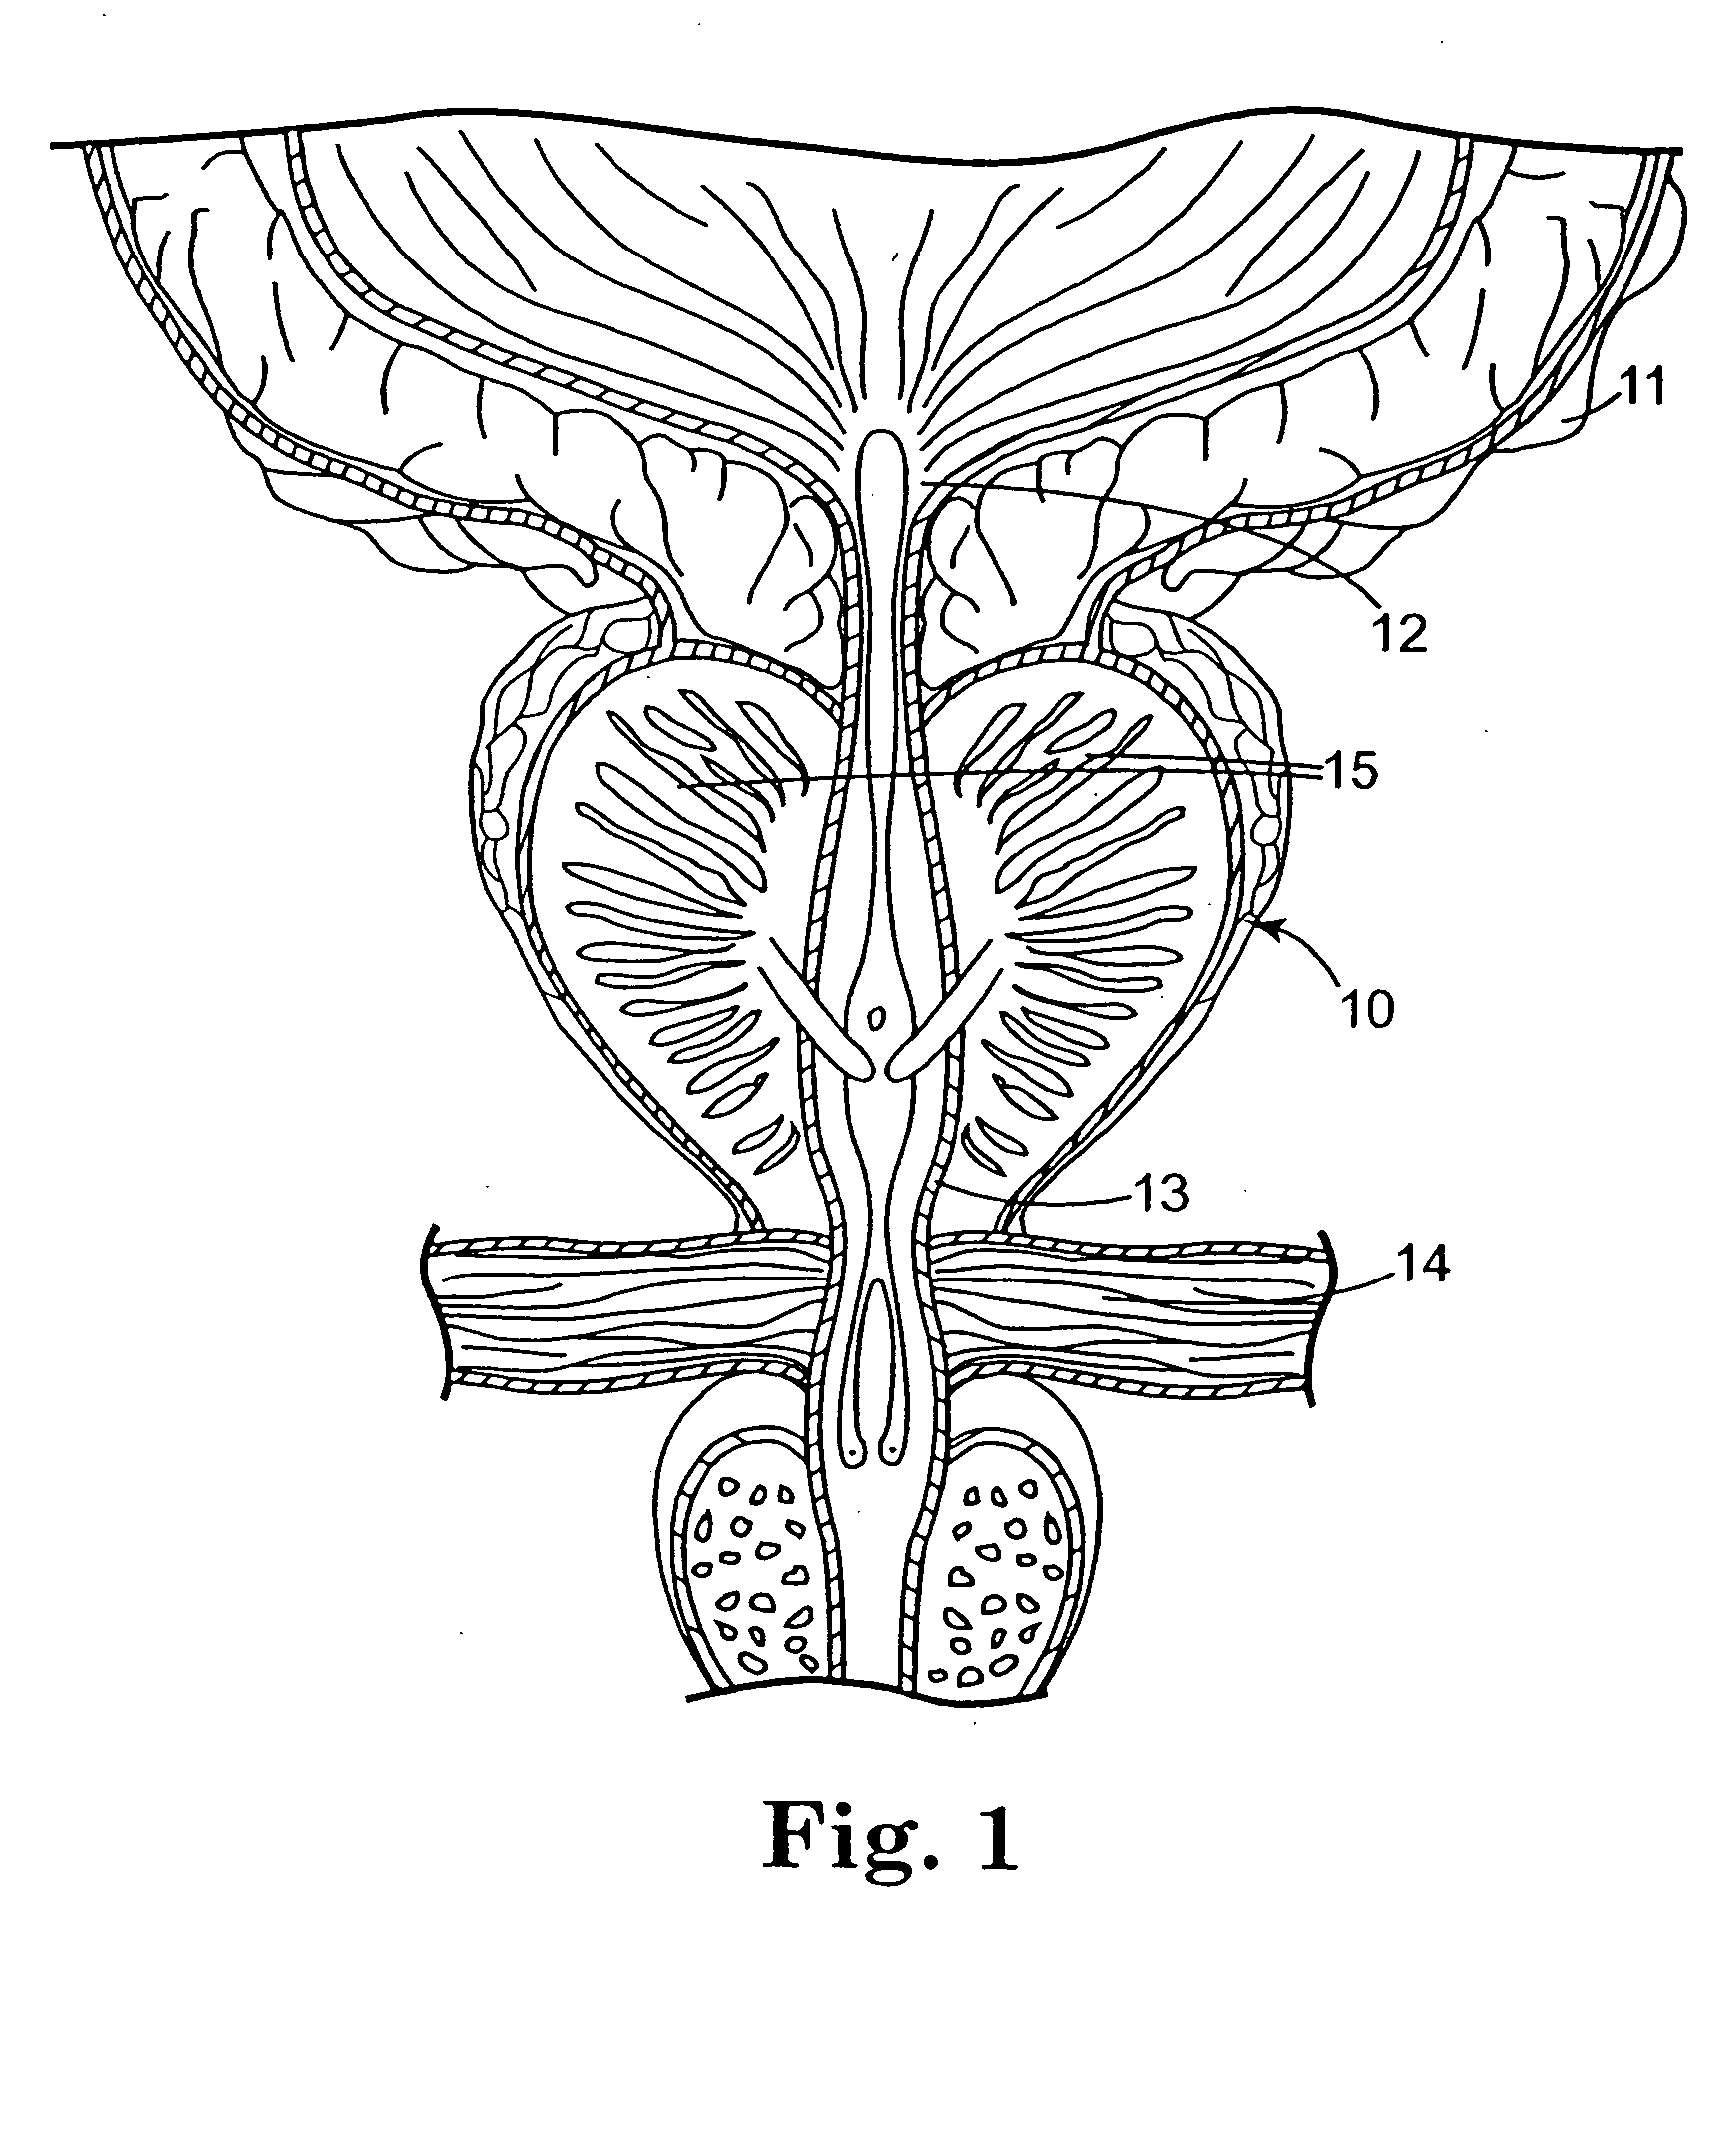 Method of injecting a drug and echogenic bubbles into prostate tissue